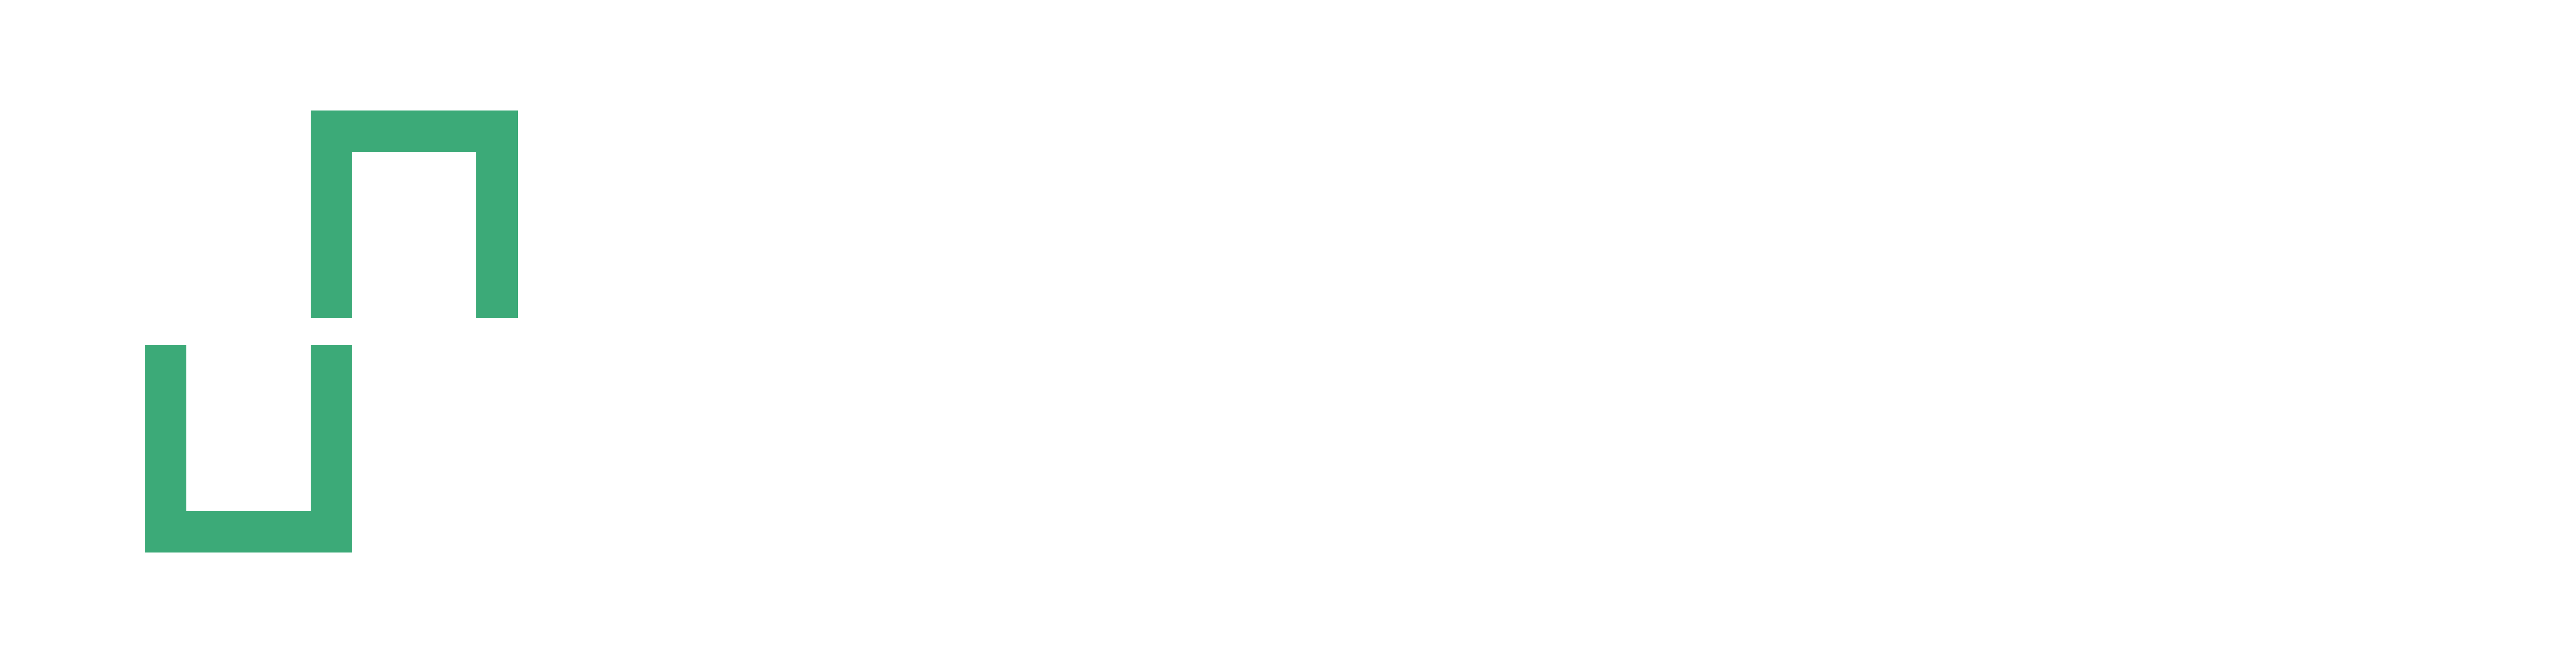 ULN Group Division for Careers & Employment Logo